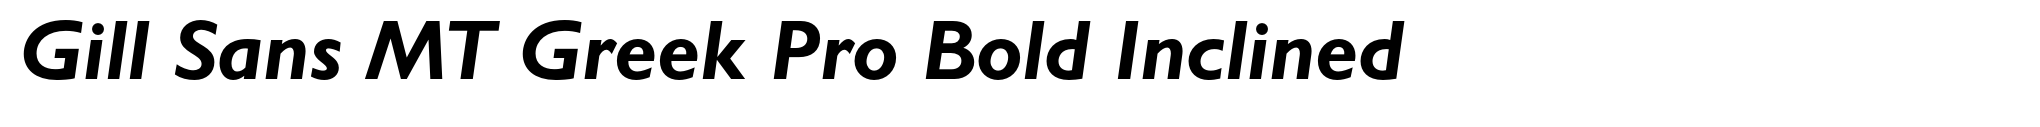 Gill Sans MT Greek Pro Bold Inclined image